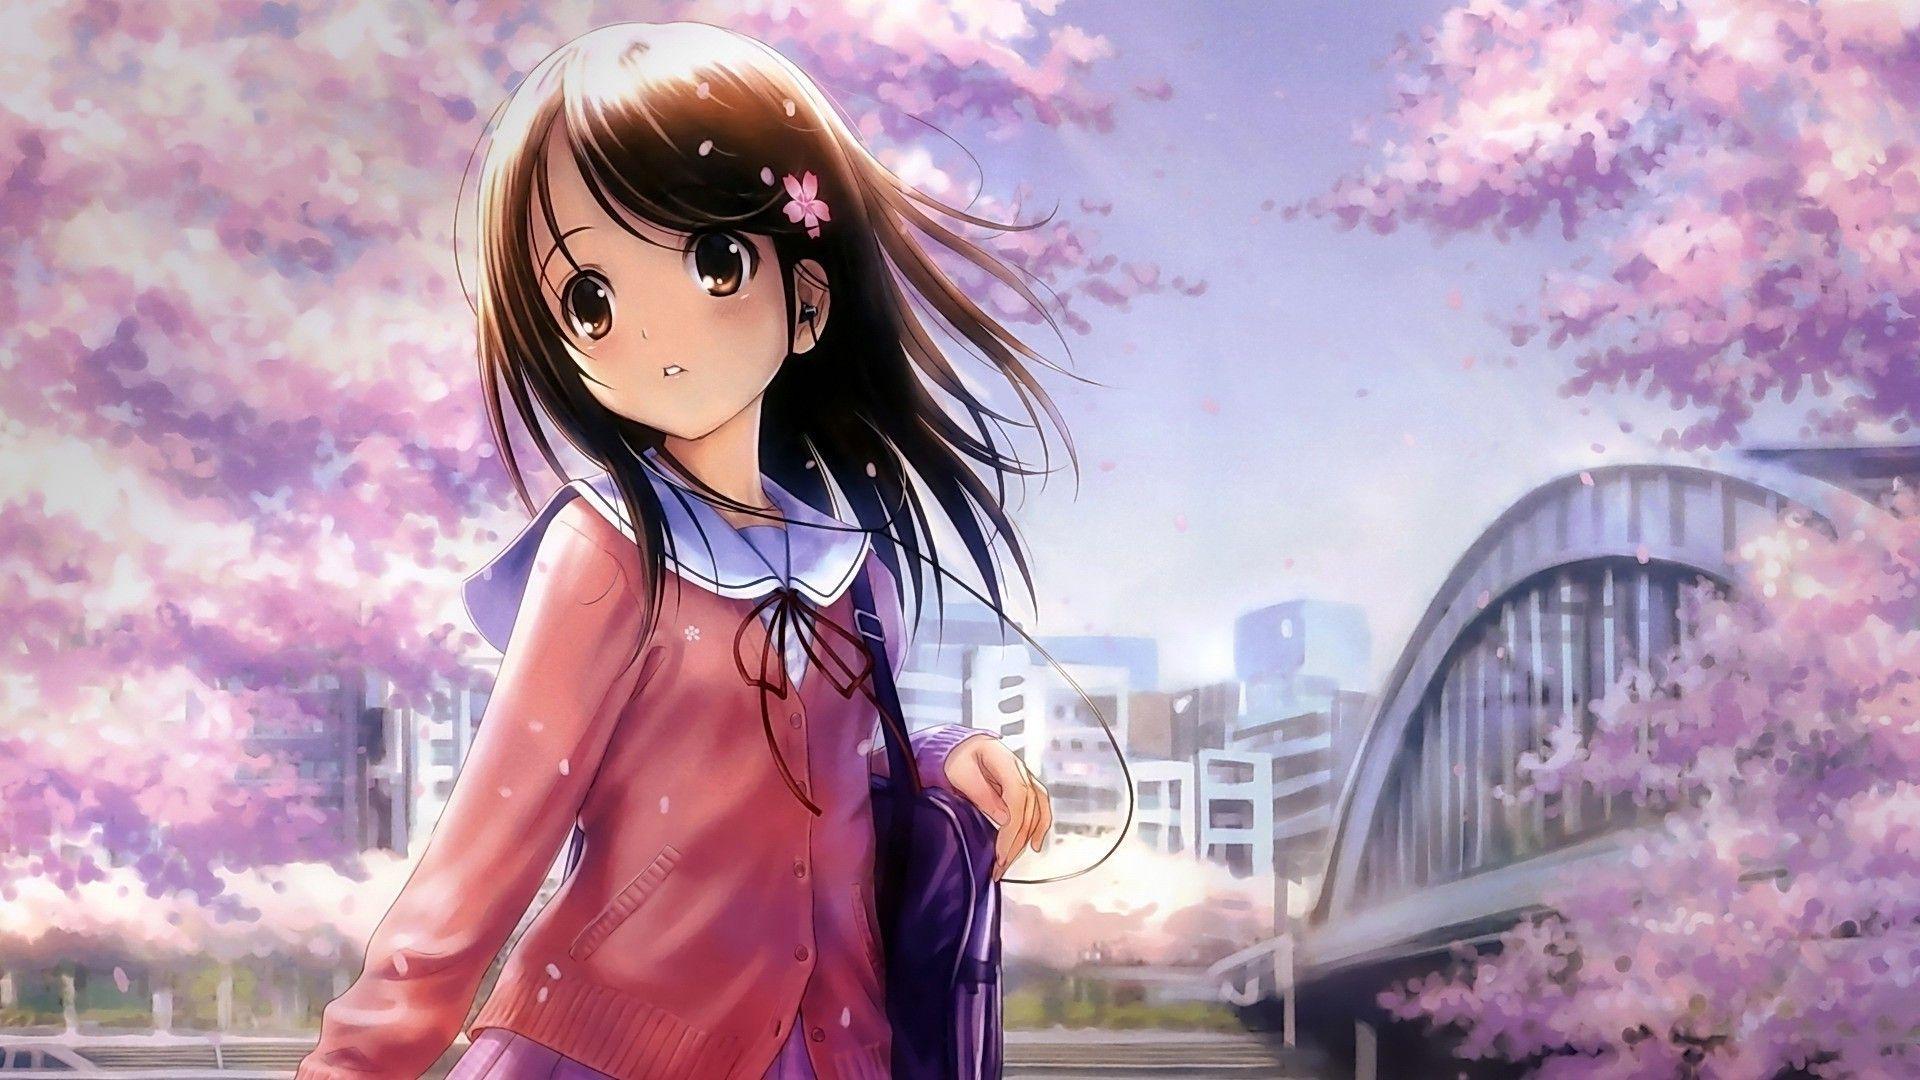 Simple Anime Girls 1920X1080 Wallpapers - Top Free Simple Anime Girls